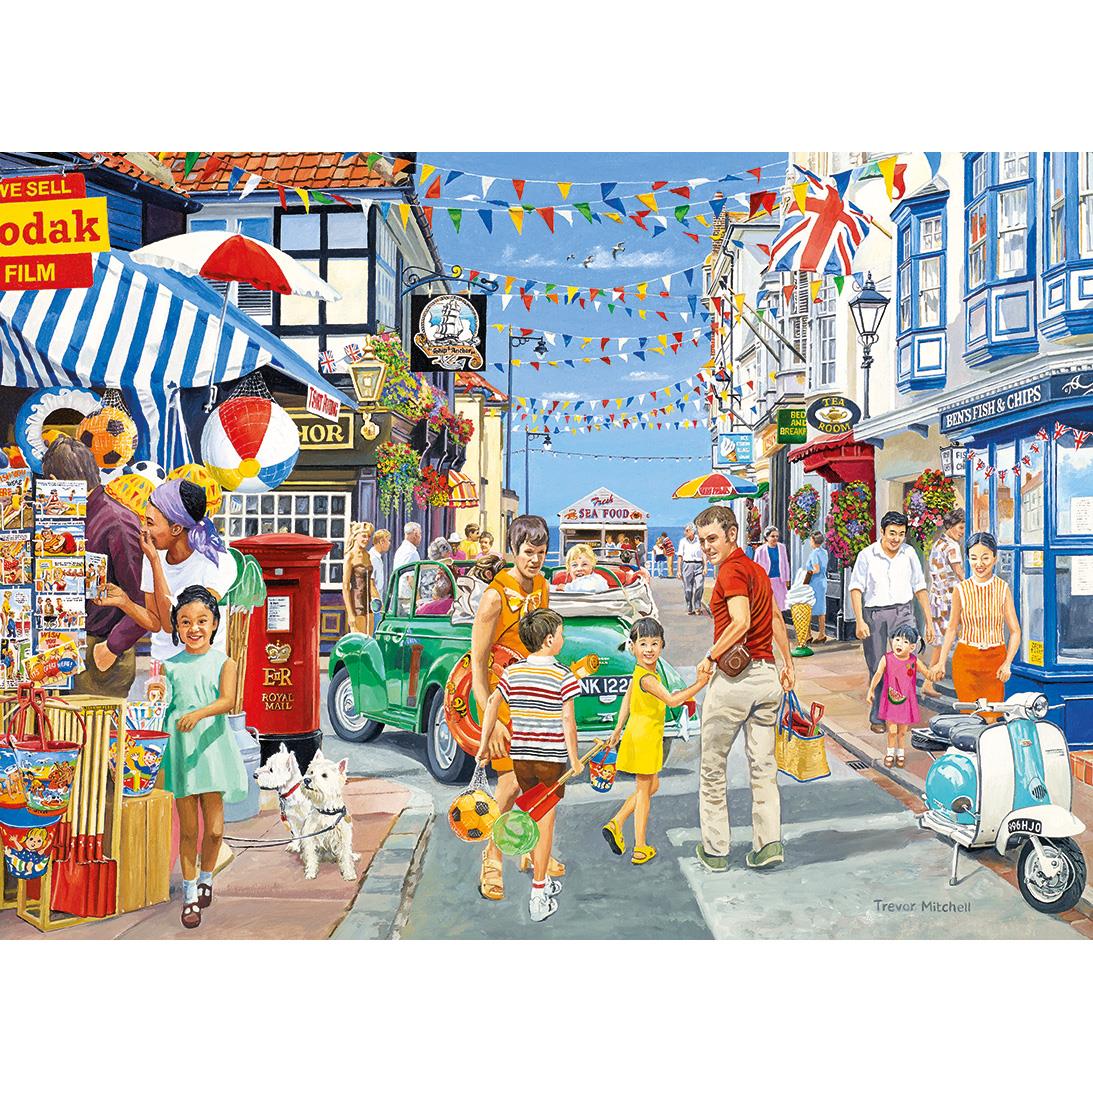 Heading for the beach  1000 Piece Jigsaw Puzzle